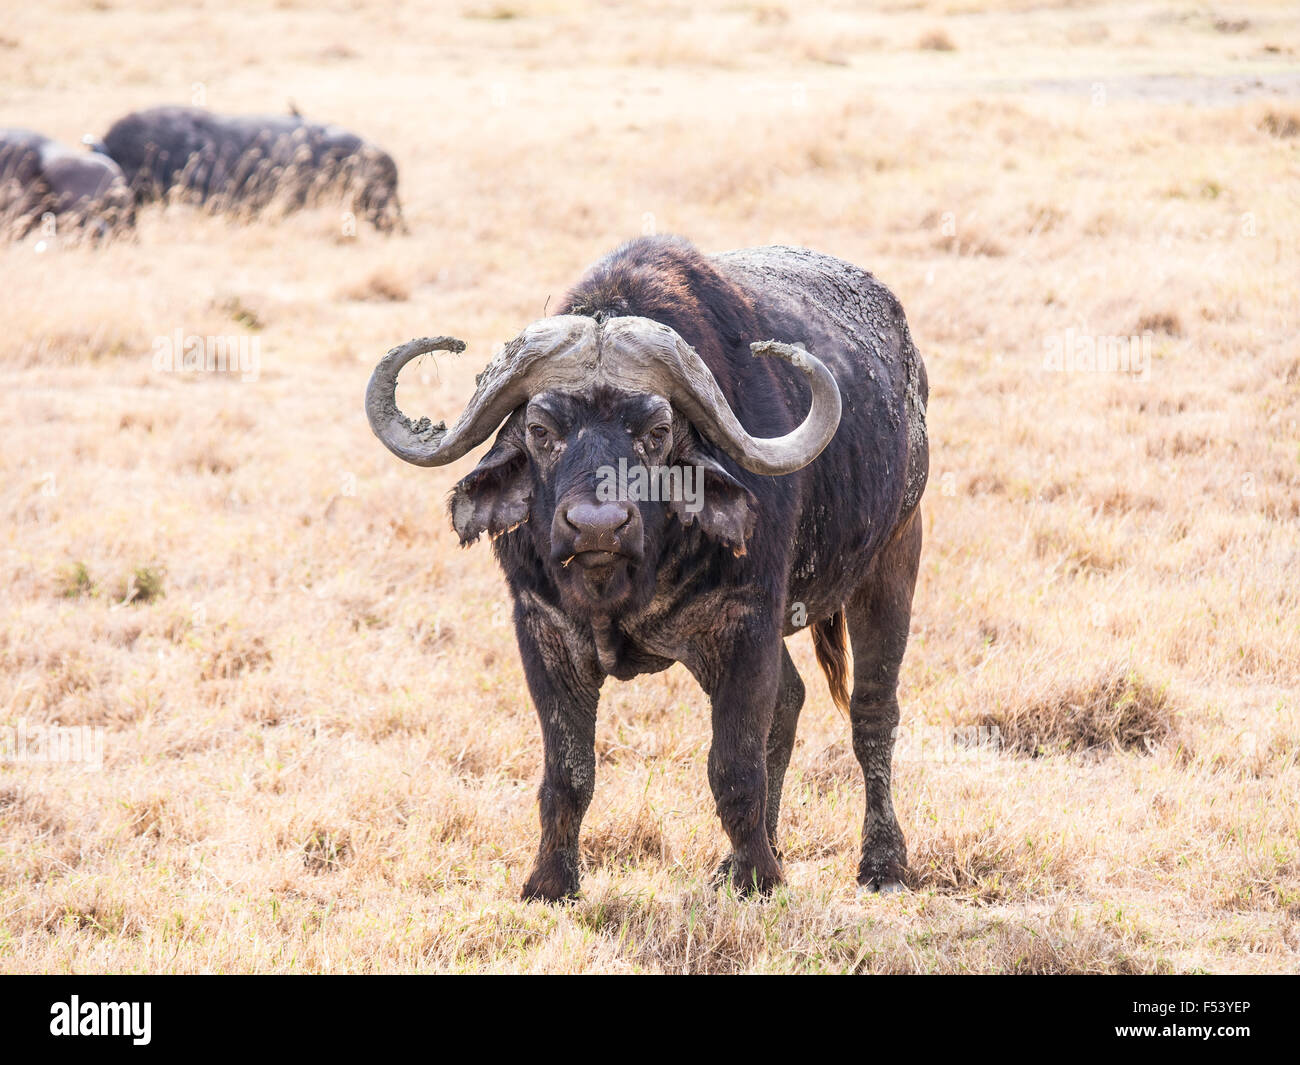 African buffalo (Syncerus caffer caffer) in Ngorongoro Crater in Tanzania, Africa. Stock Photo